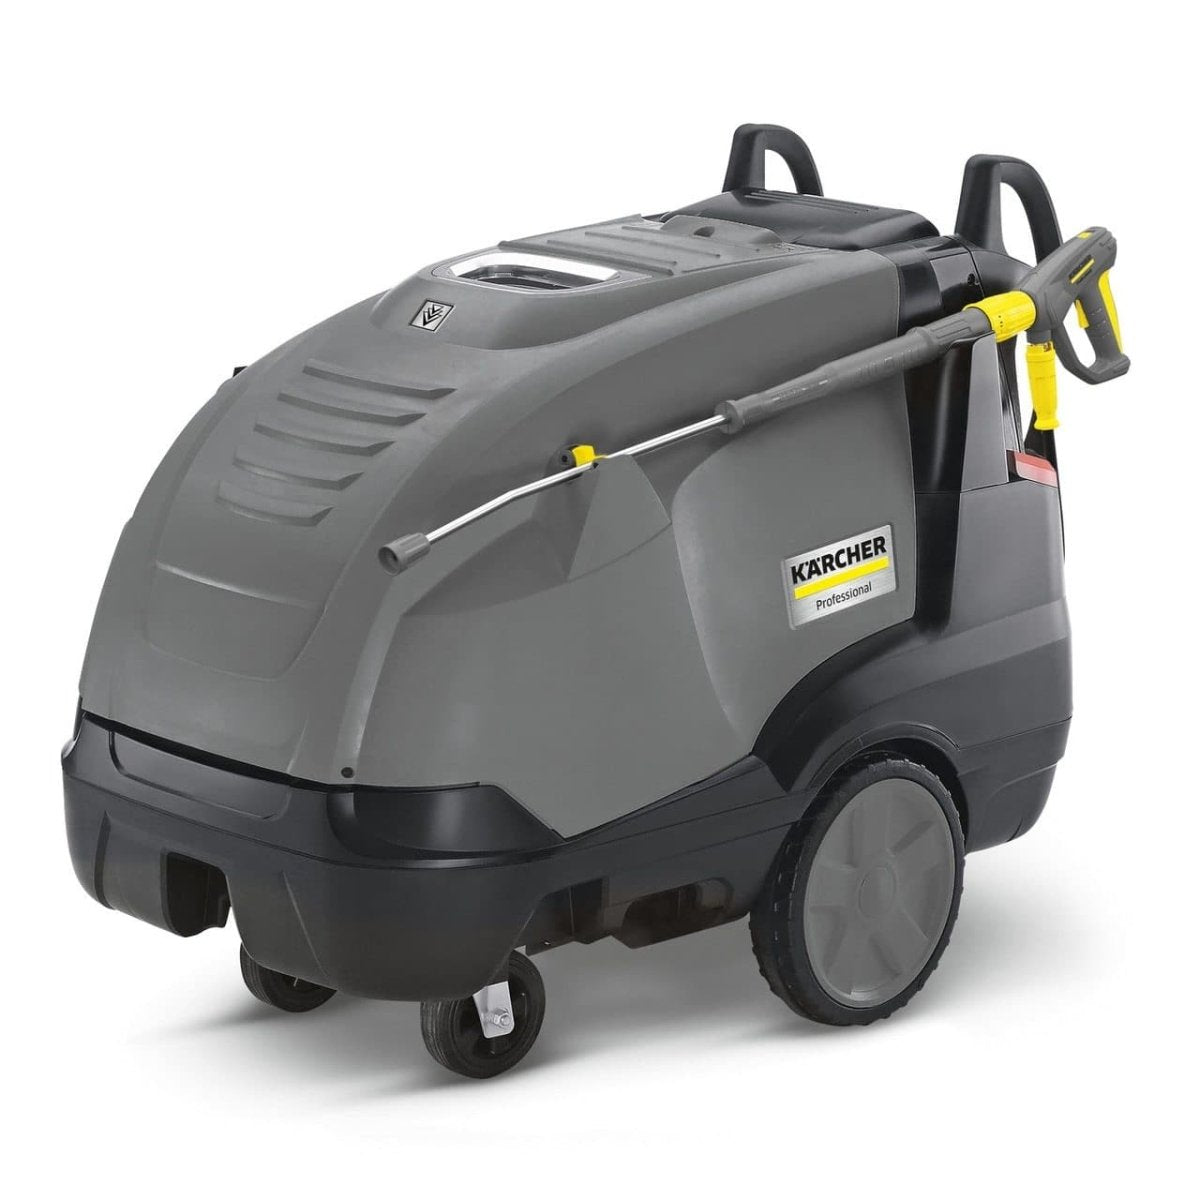 Hot Water High Pressure Washer HDS 5.0/30-4 S Eb High Flow Pressure Cleaner - Karcher